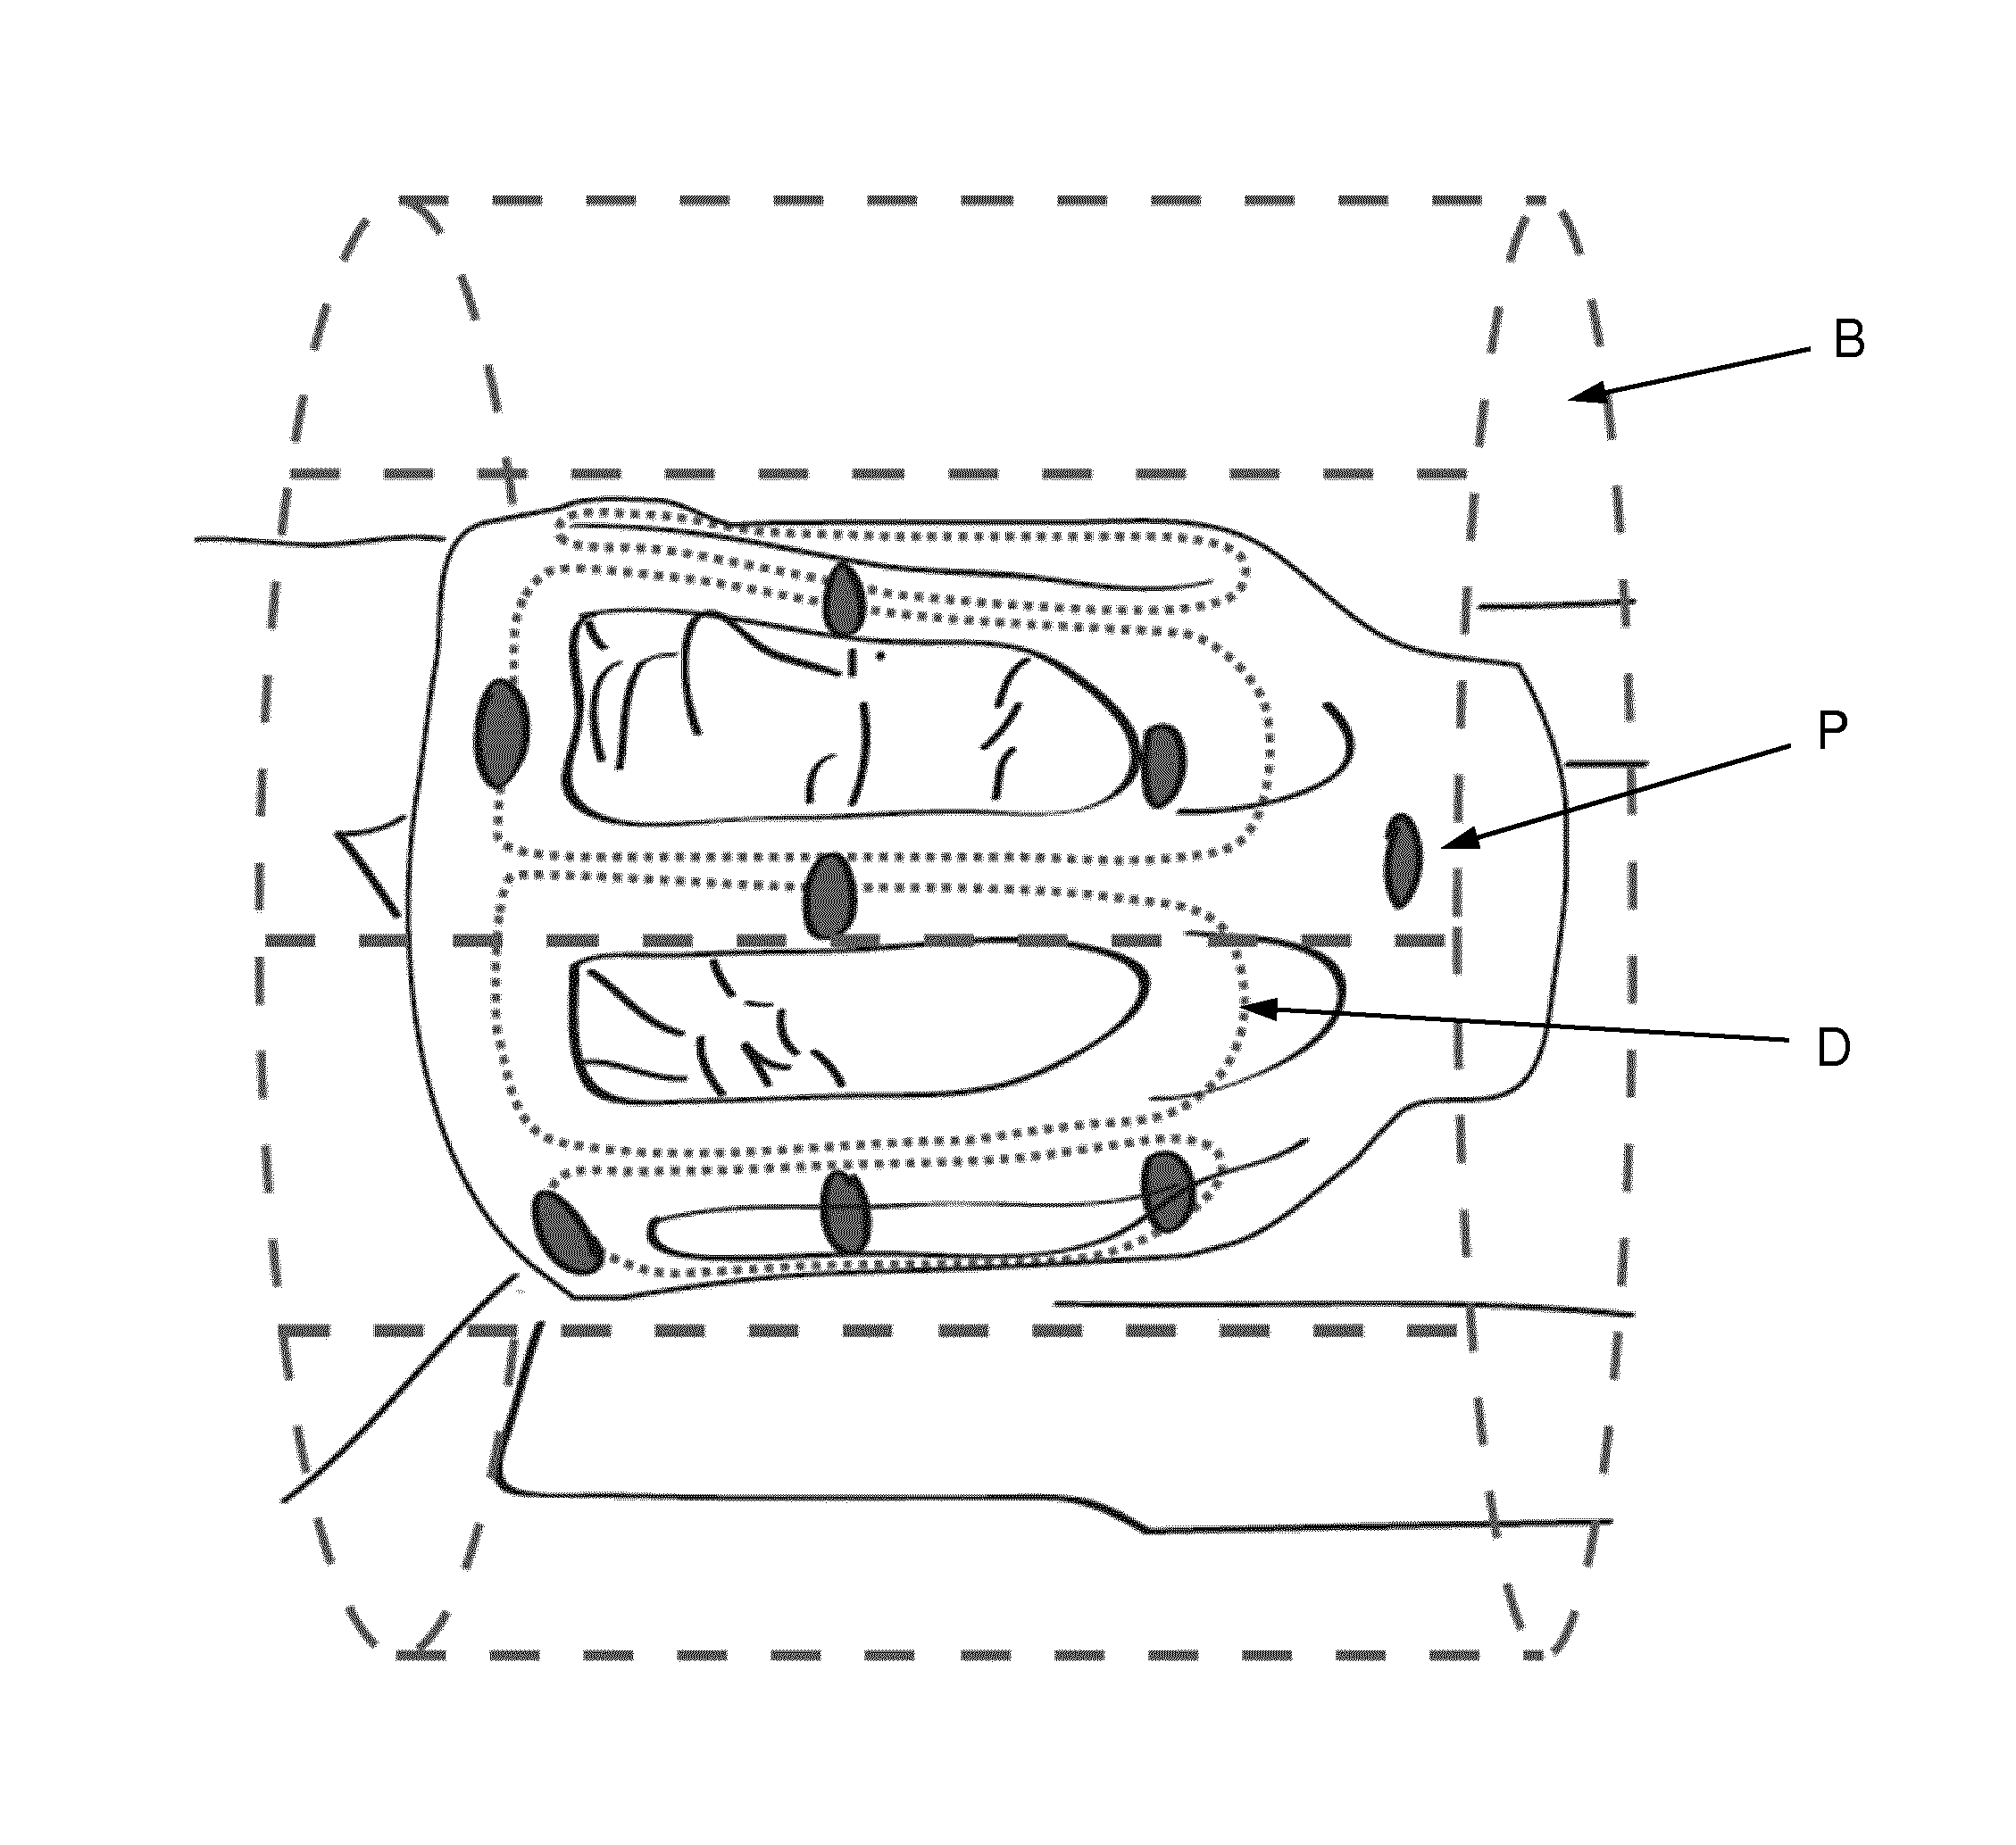 Dynamic Field Camera Arrangement for Magnetic Resonance Applications and Methods for Operating the Same